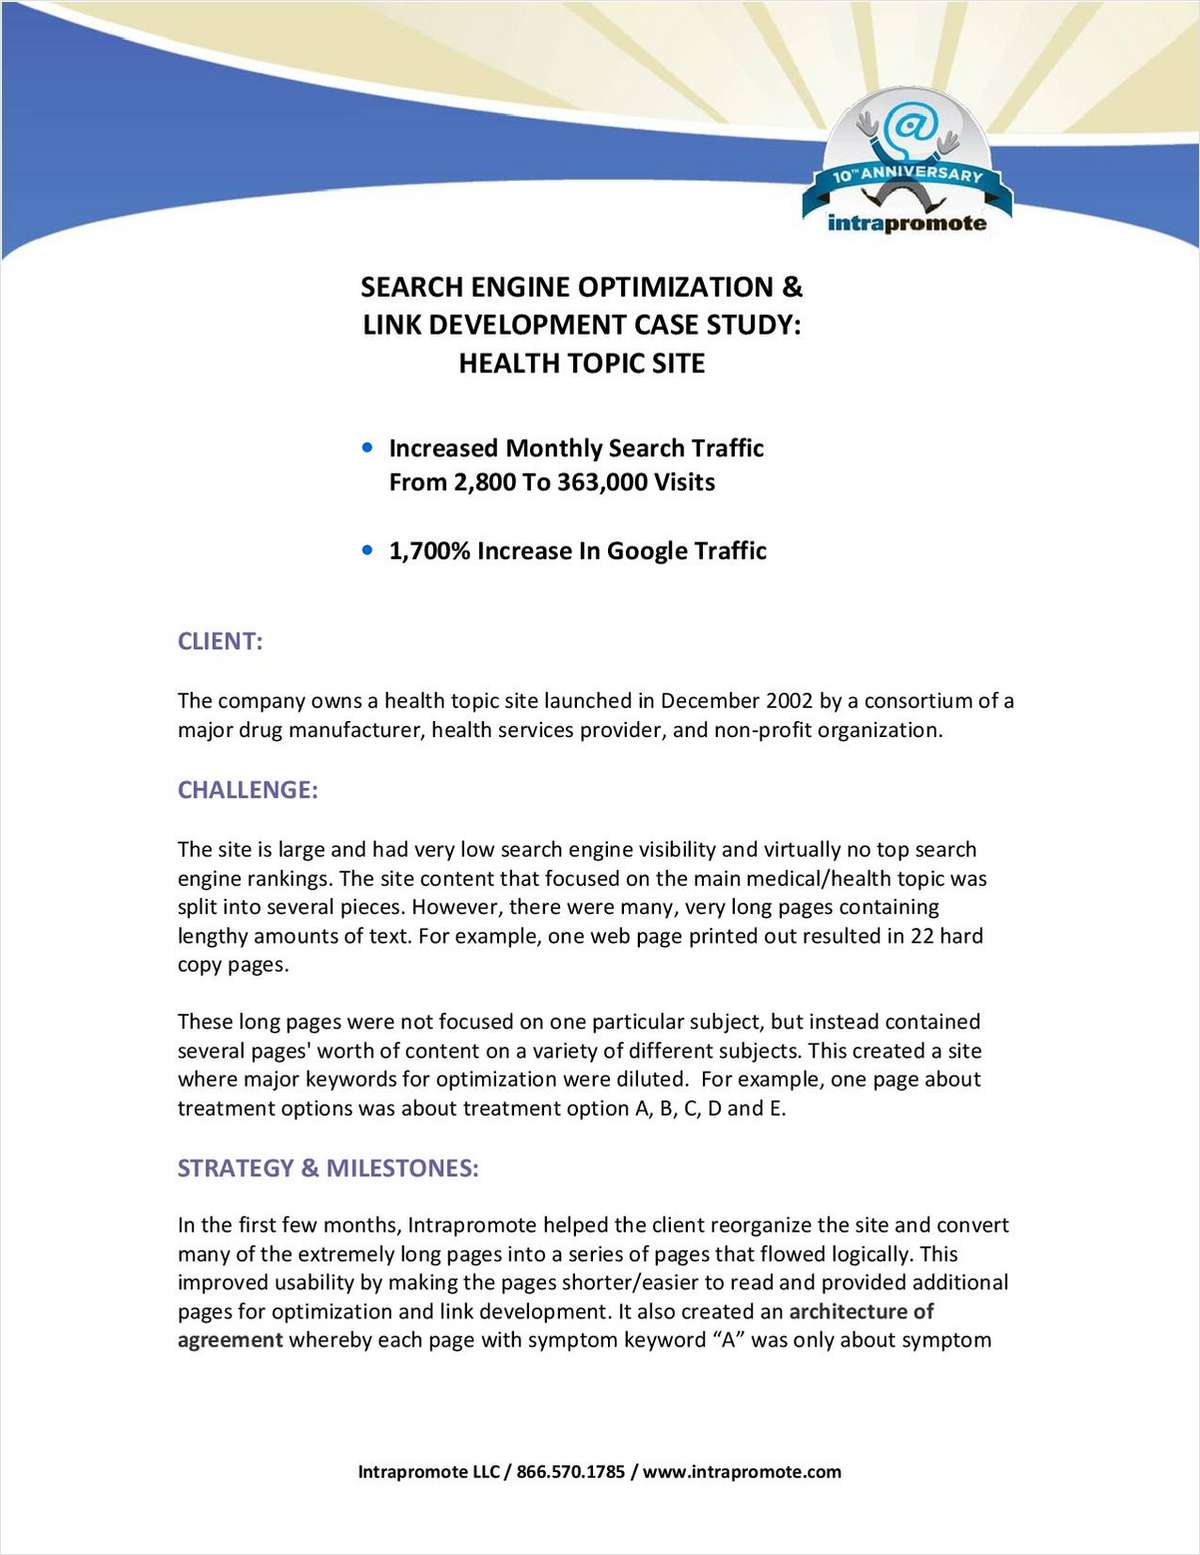 Case Study: Search Engine Optimization and Link Development Success Strategies